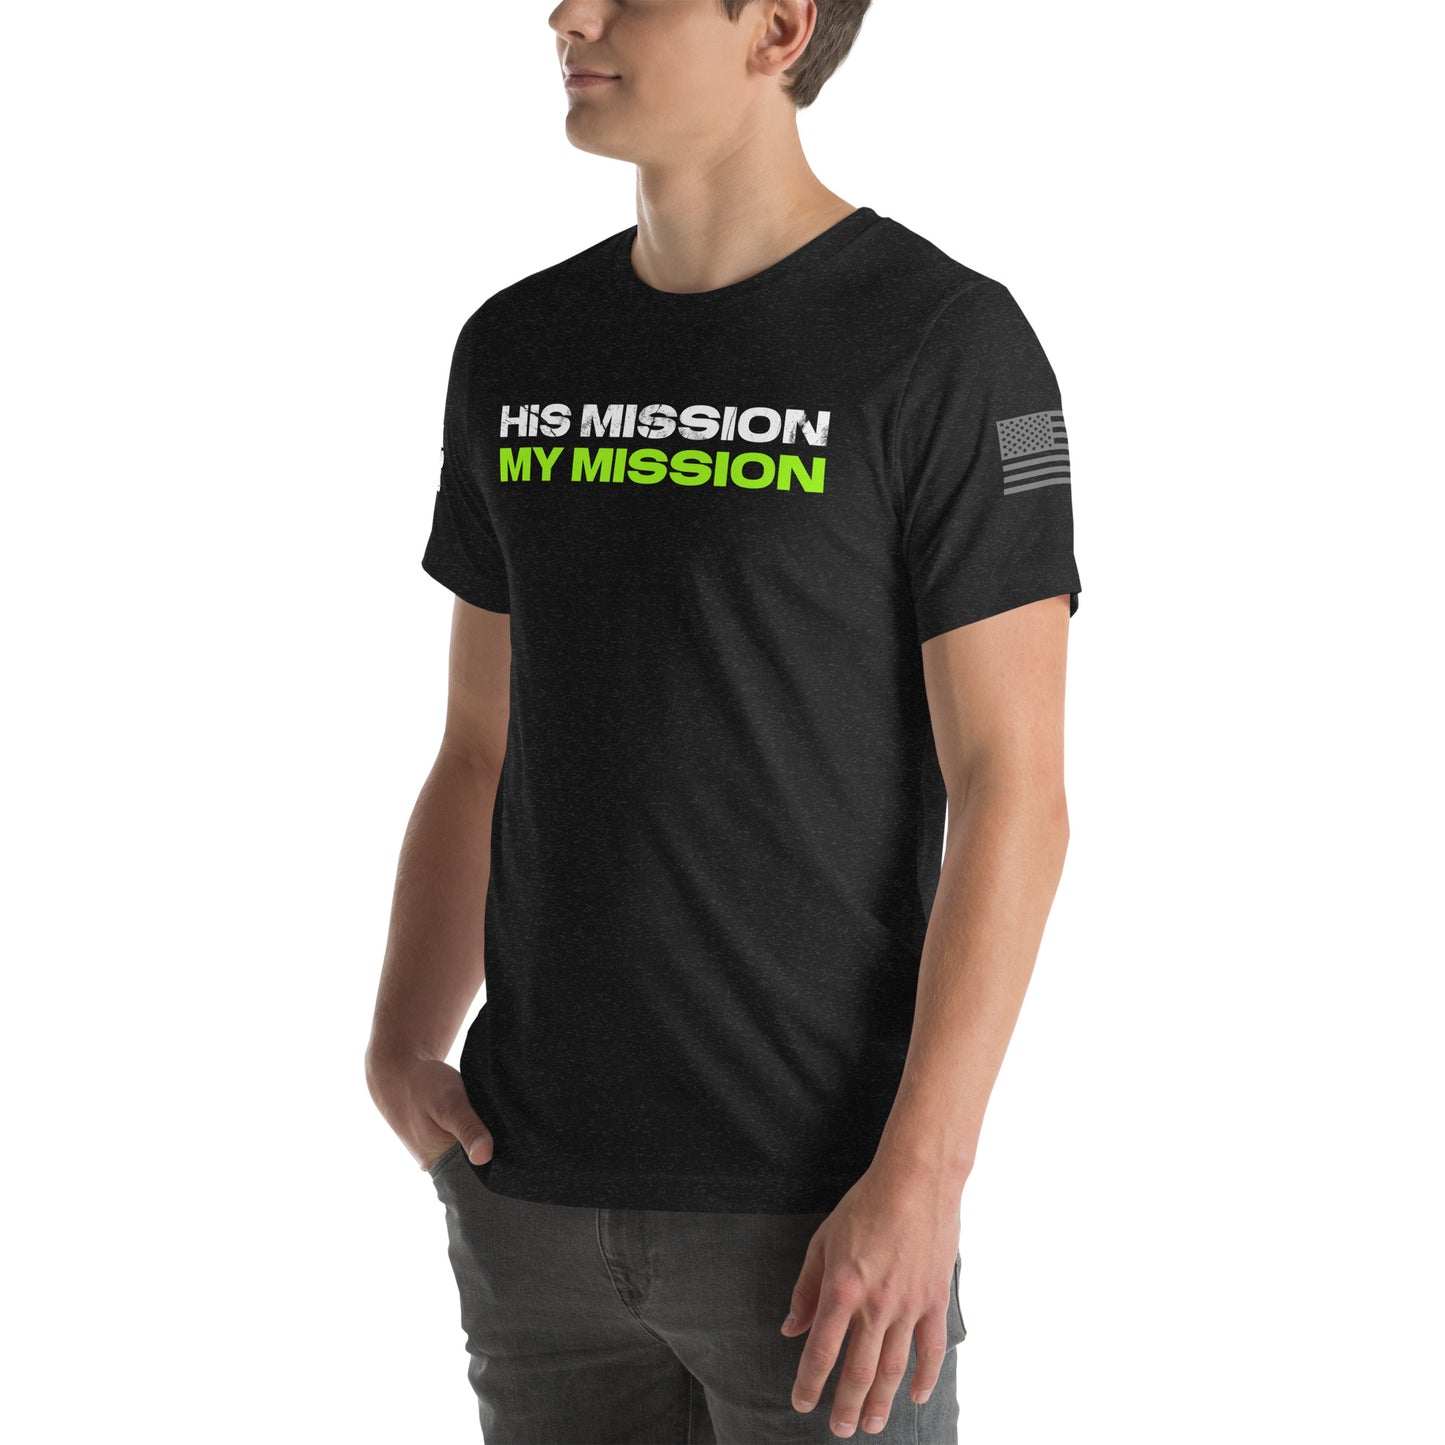 His Mission My Mission t-shirt